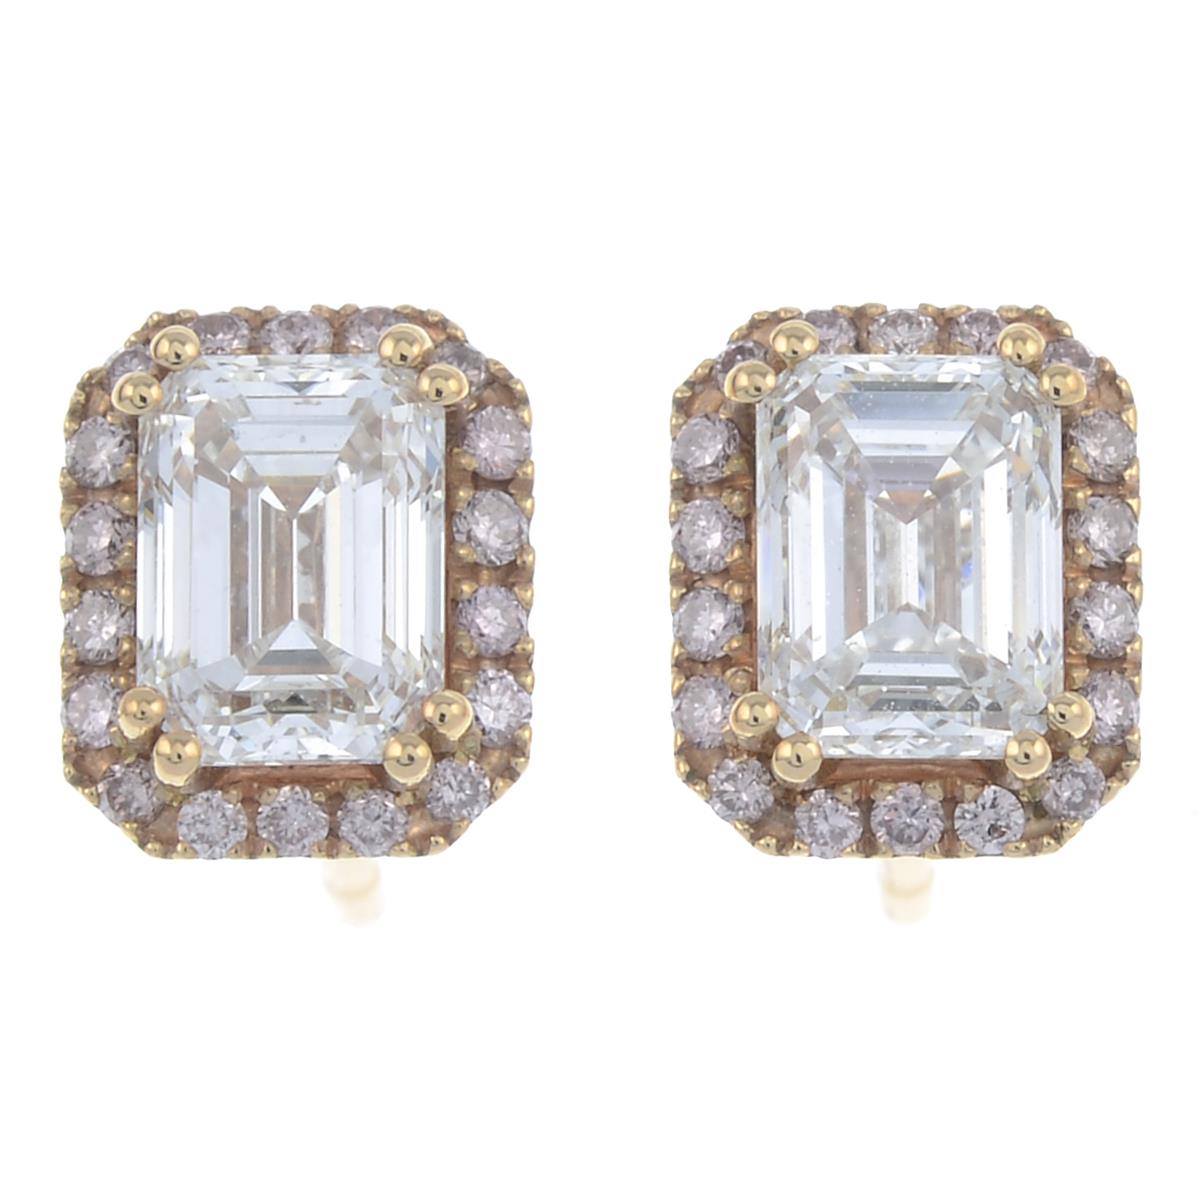 A pair of 18ct gold rectangular-shape diamond and brilliant-cut 'pink' diamond cluster earrings. - Image 2 of 3